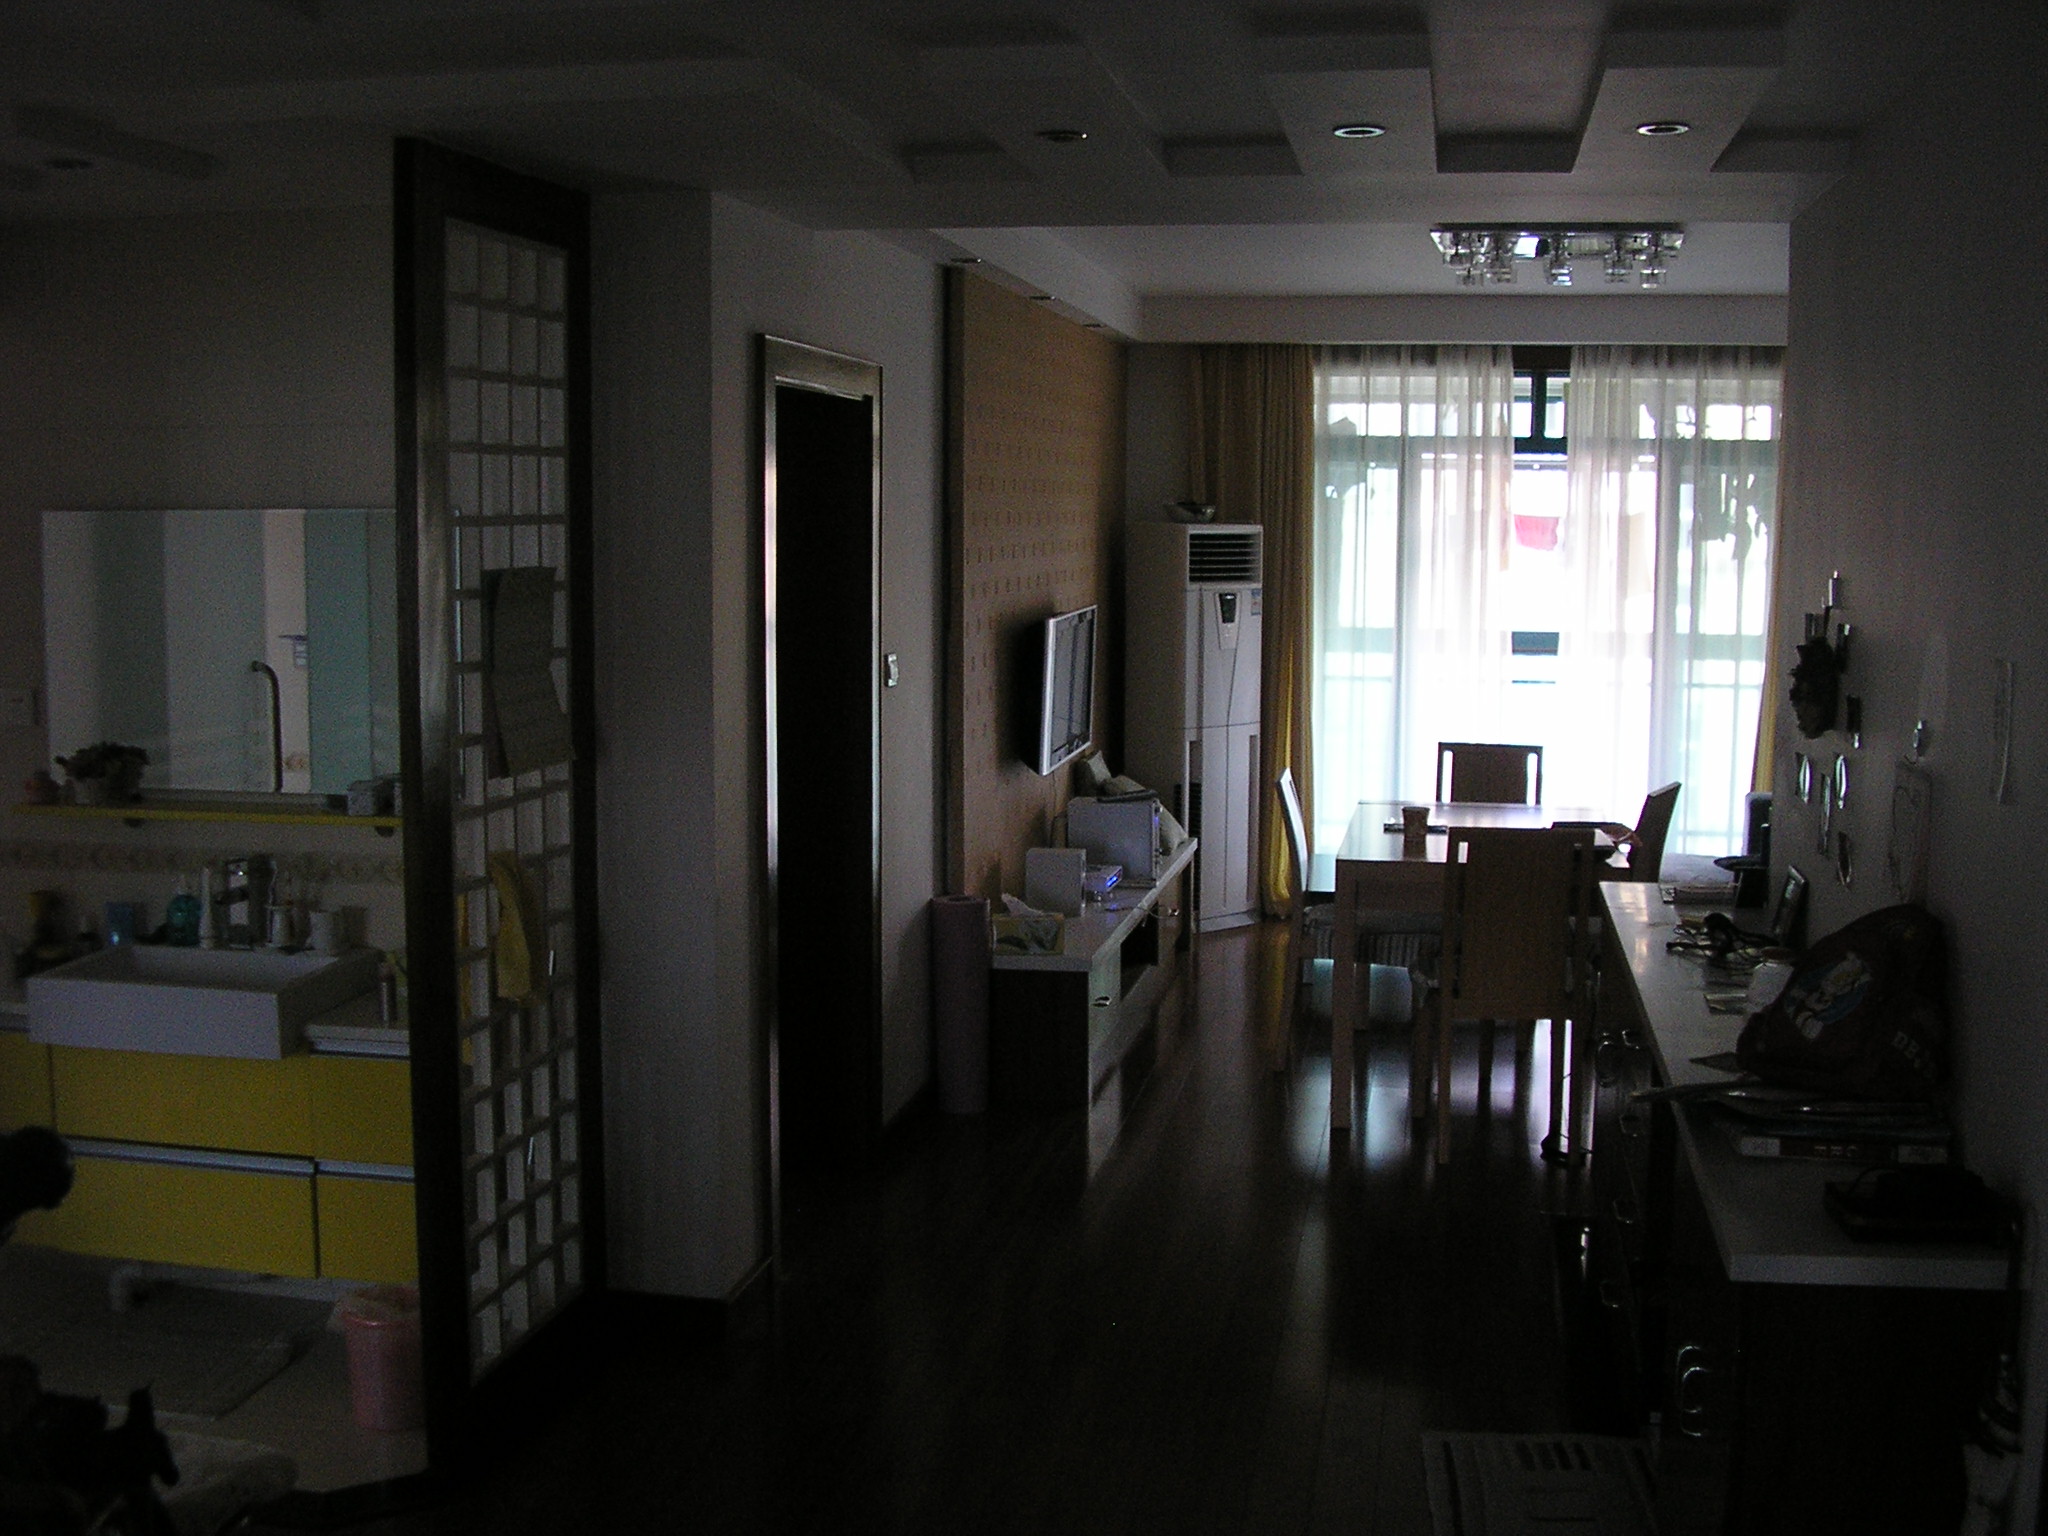 Oct 14-19 2007 - Shanghai - From the entryway looking into Noriko's living room.